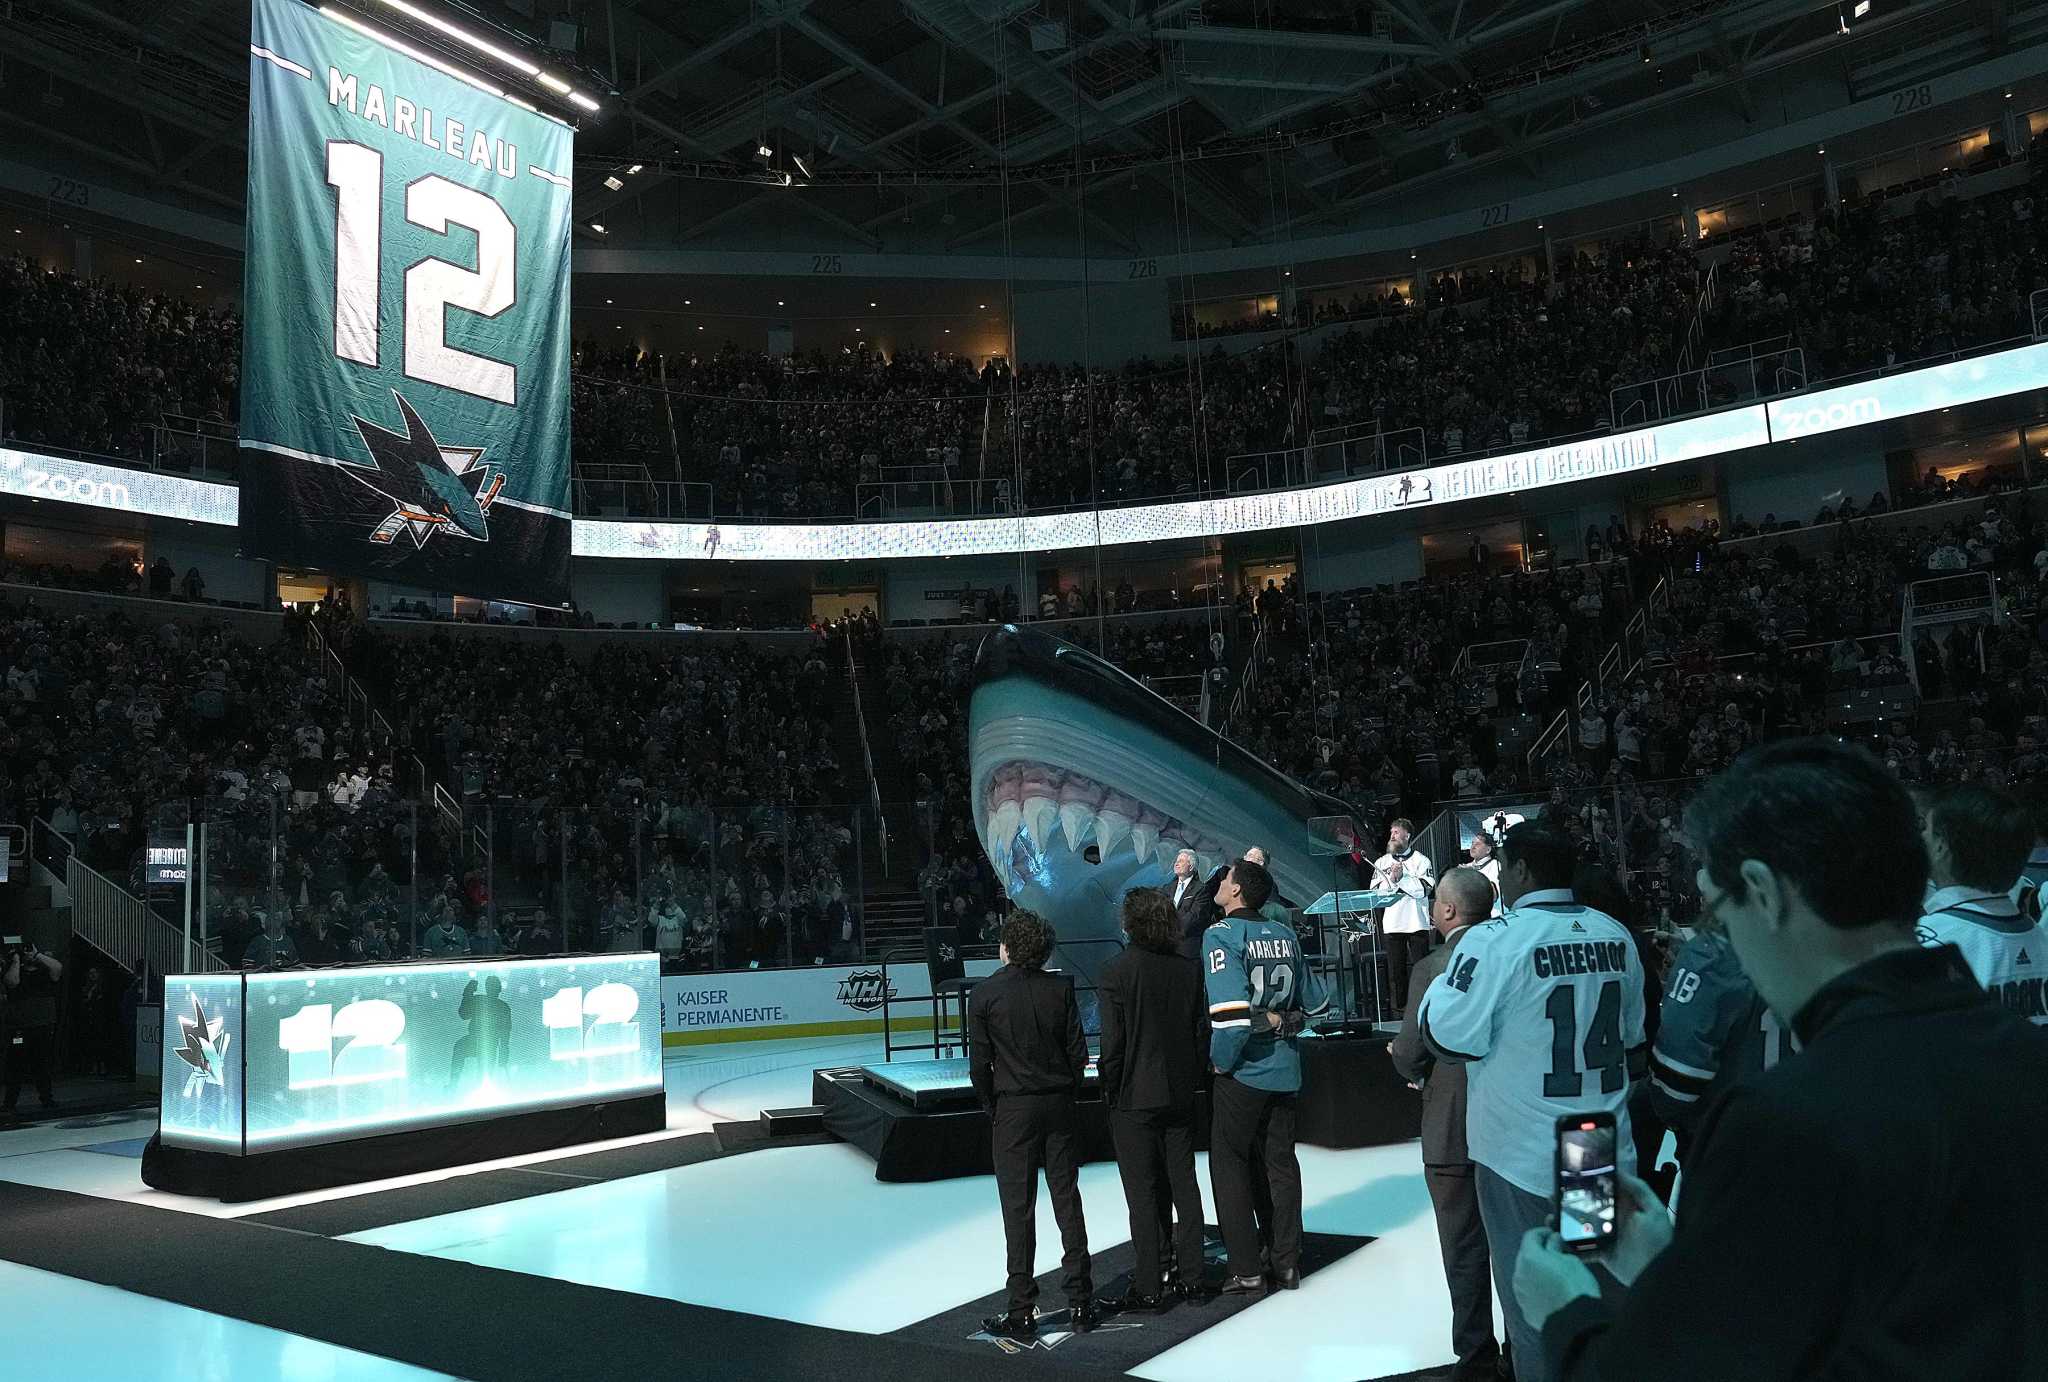 San Jose Sharks to retire Patrick Marleau's No. 12 - Daily Faceoff